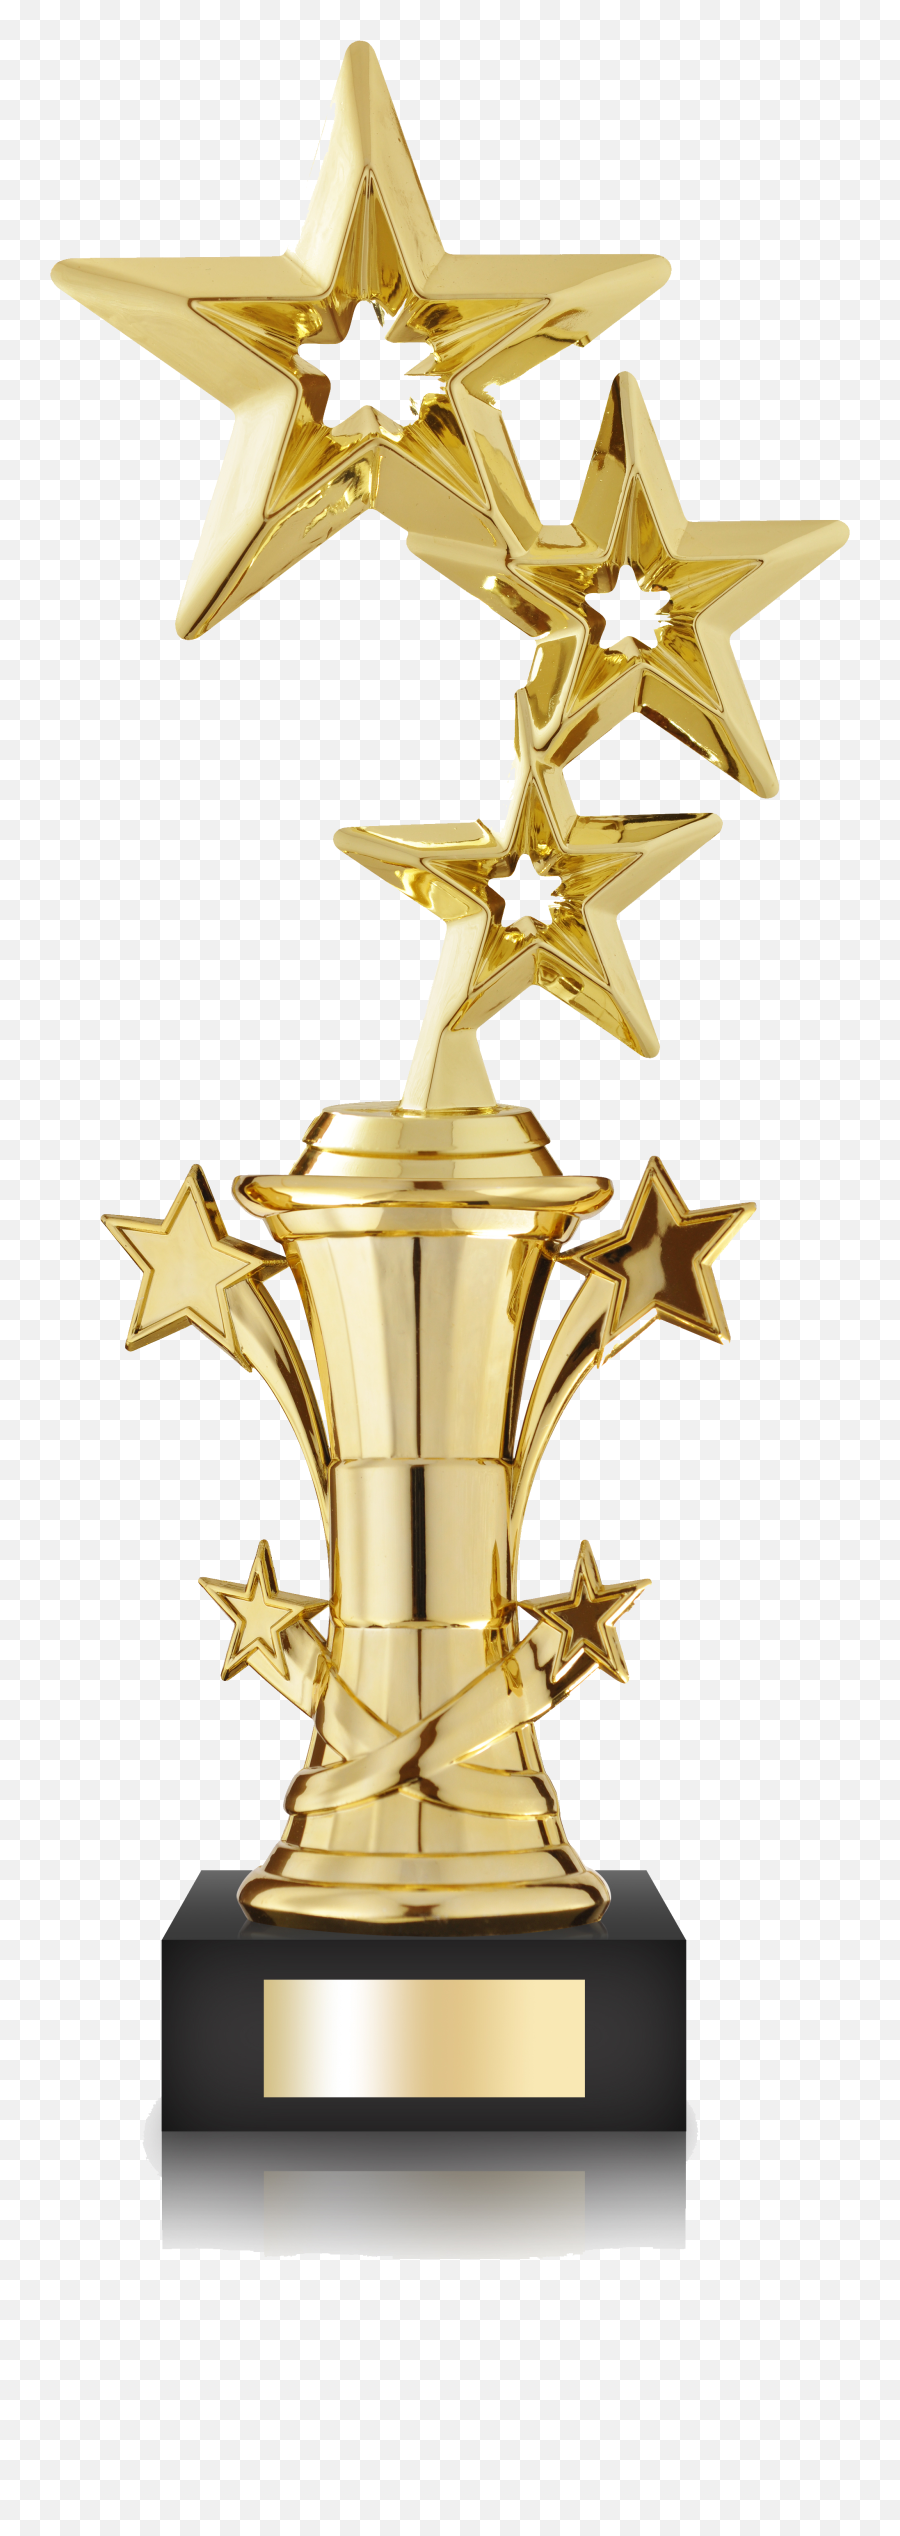 Star Trophy Png Picture 852805 - Transparent Background Trophy Png,Trophy Transparent Background